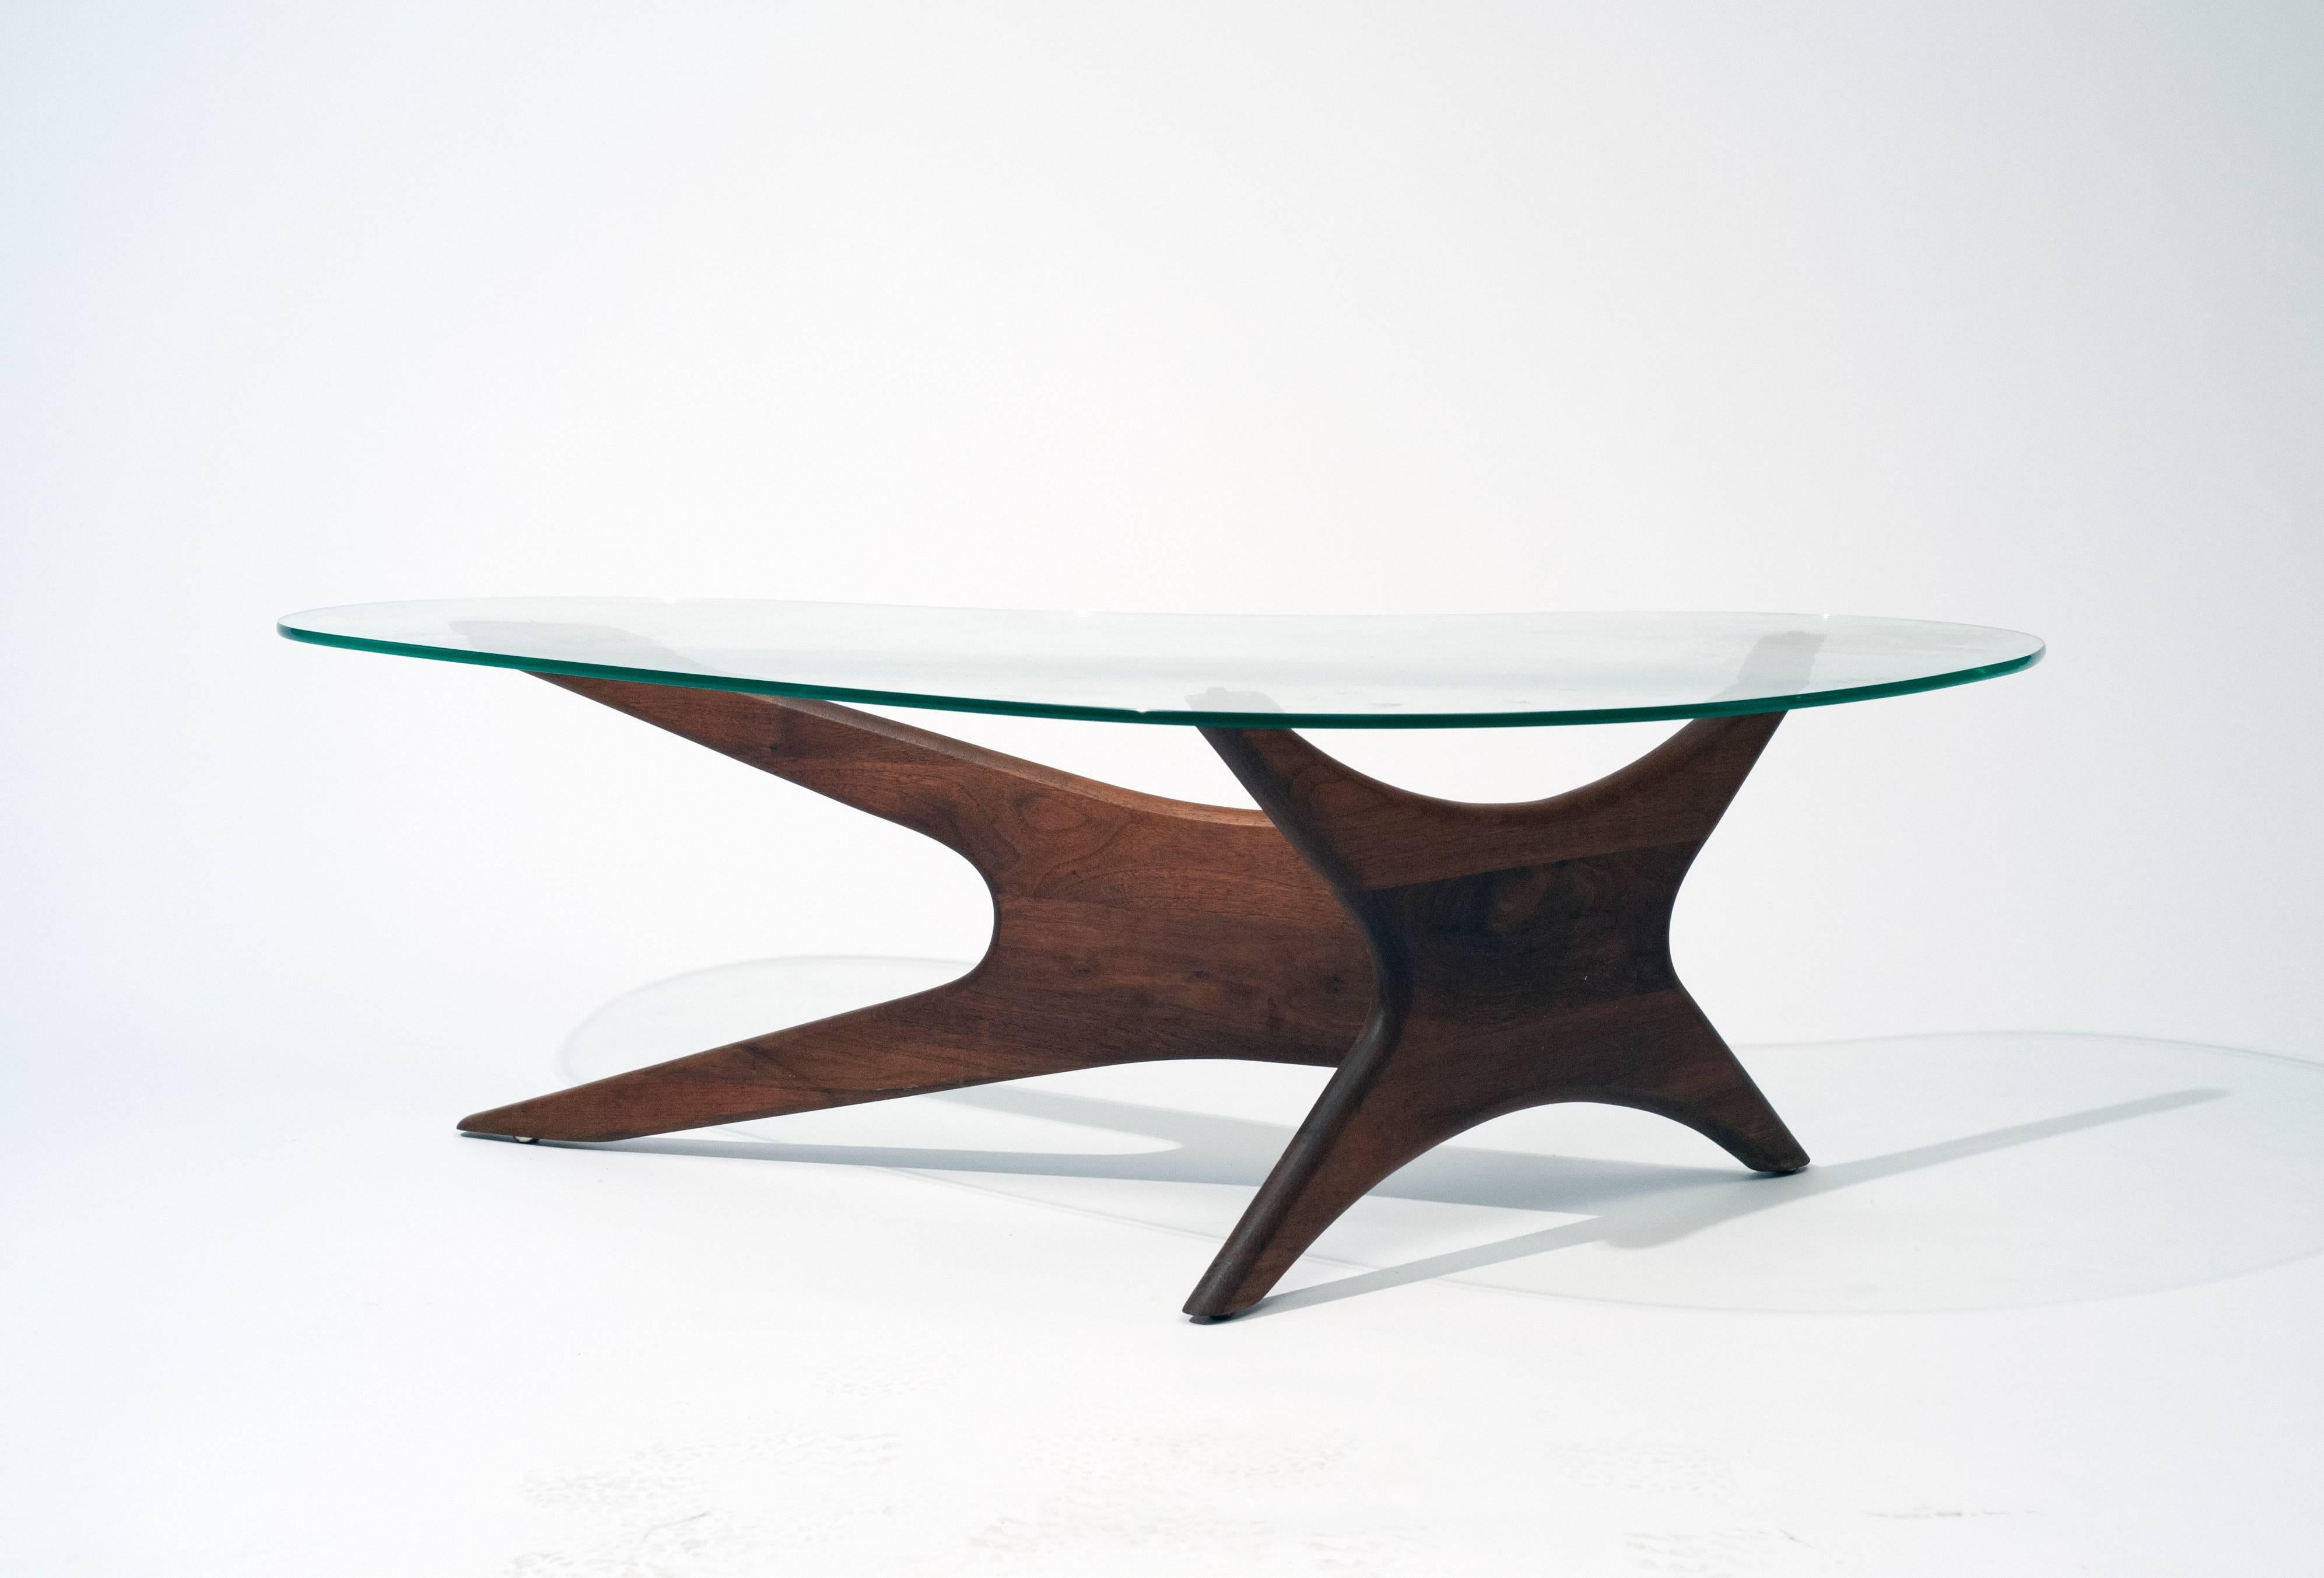 Classic modern kidney shaped coffee table by Adrian Pearsall.